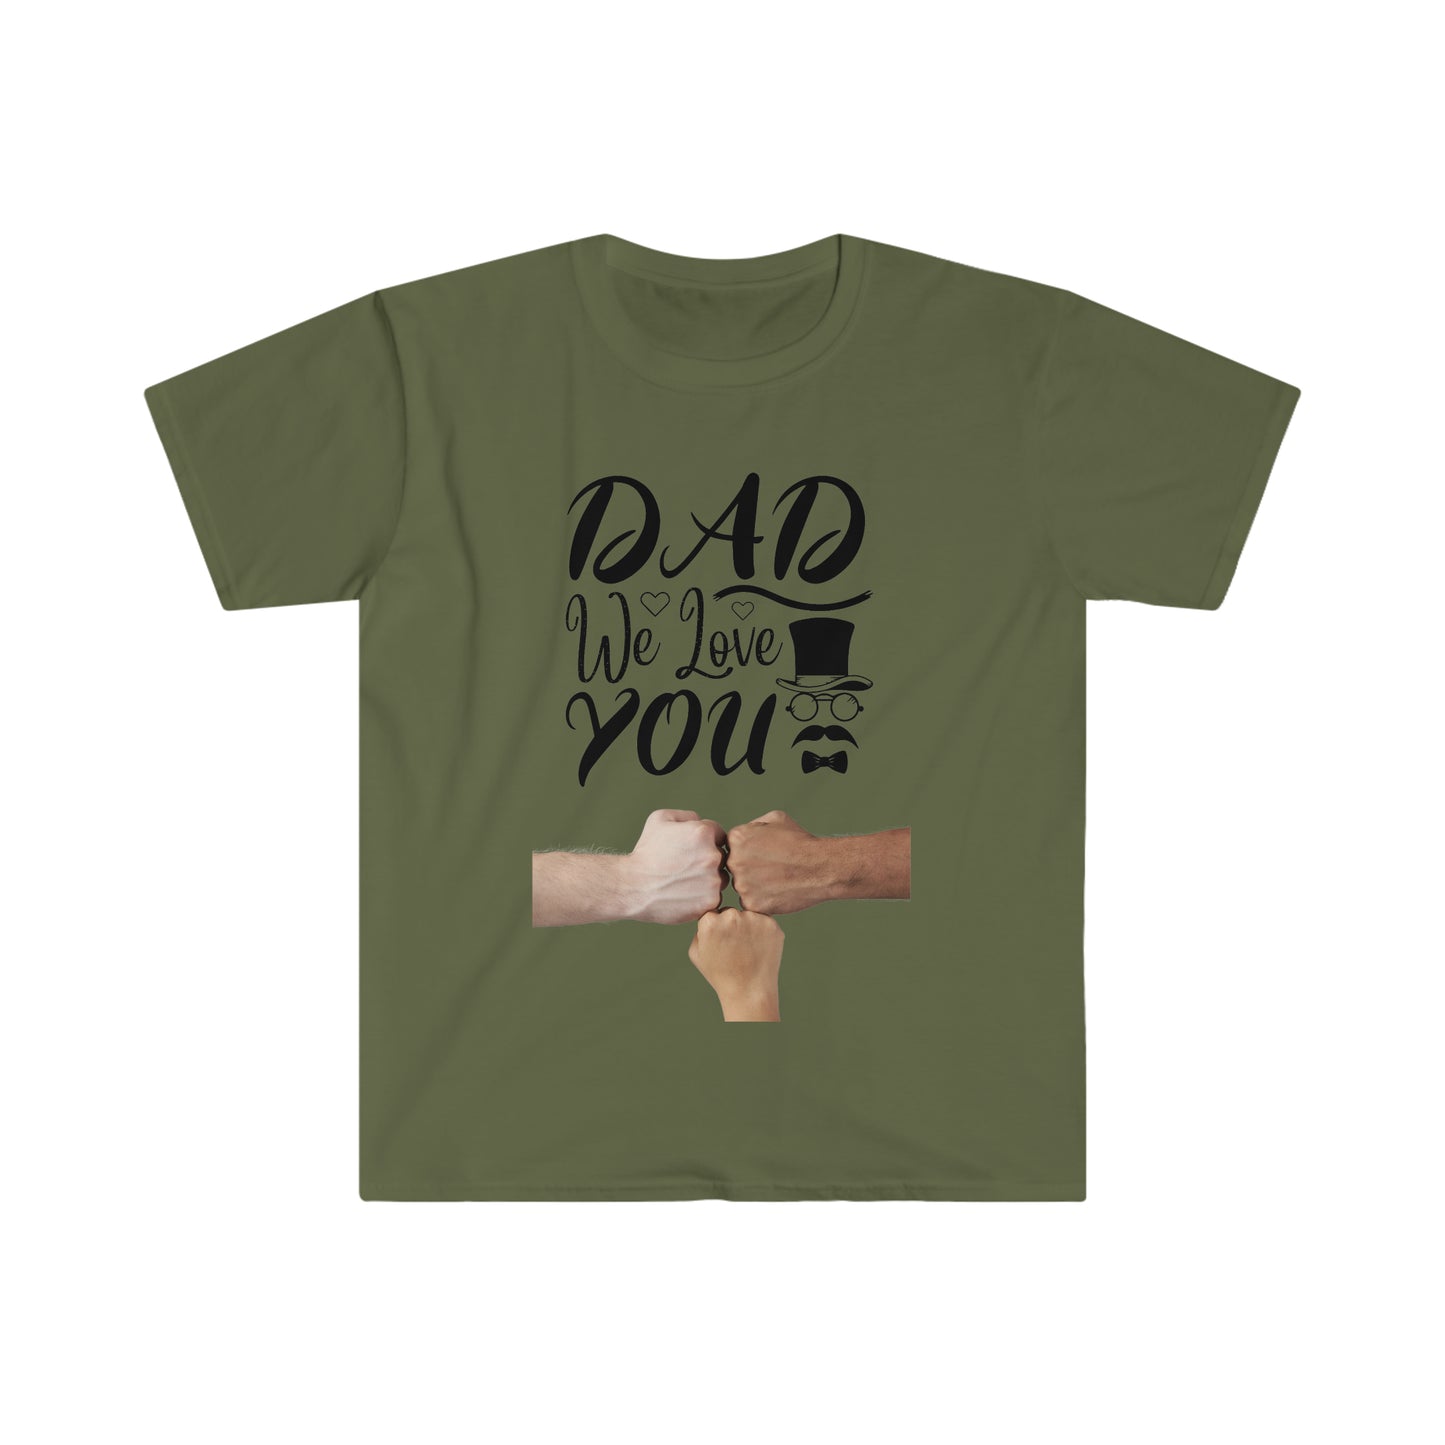 Unisex Softstyle T-Shirt, Unisex T-shirt, Funny Father's Day Gift, Dad Jokes, Funny Dad Shirt, Funny Shirt for Dad, Dad Birthday Gift, Dad Anniversary Gift